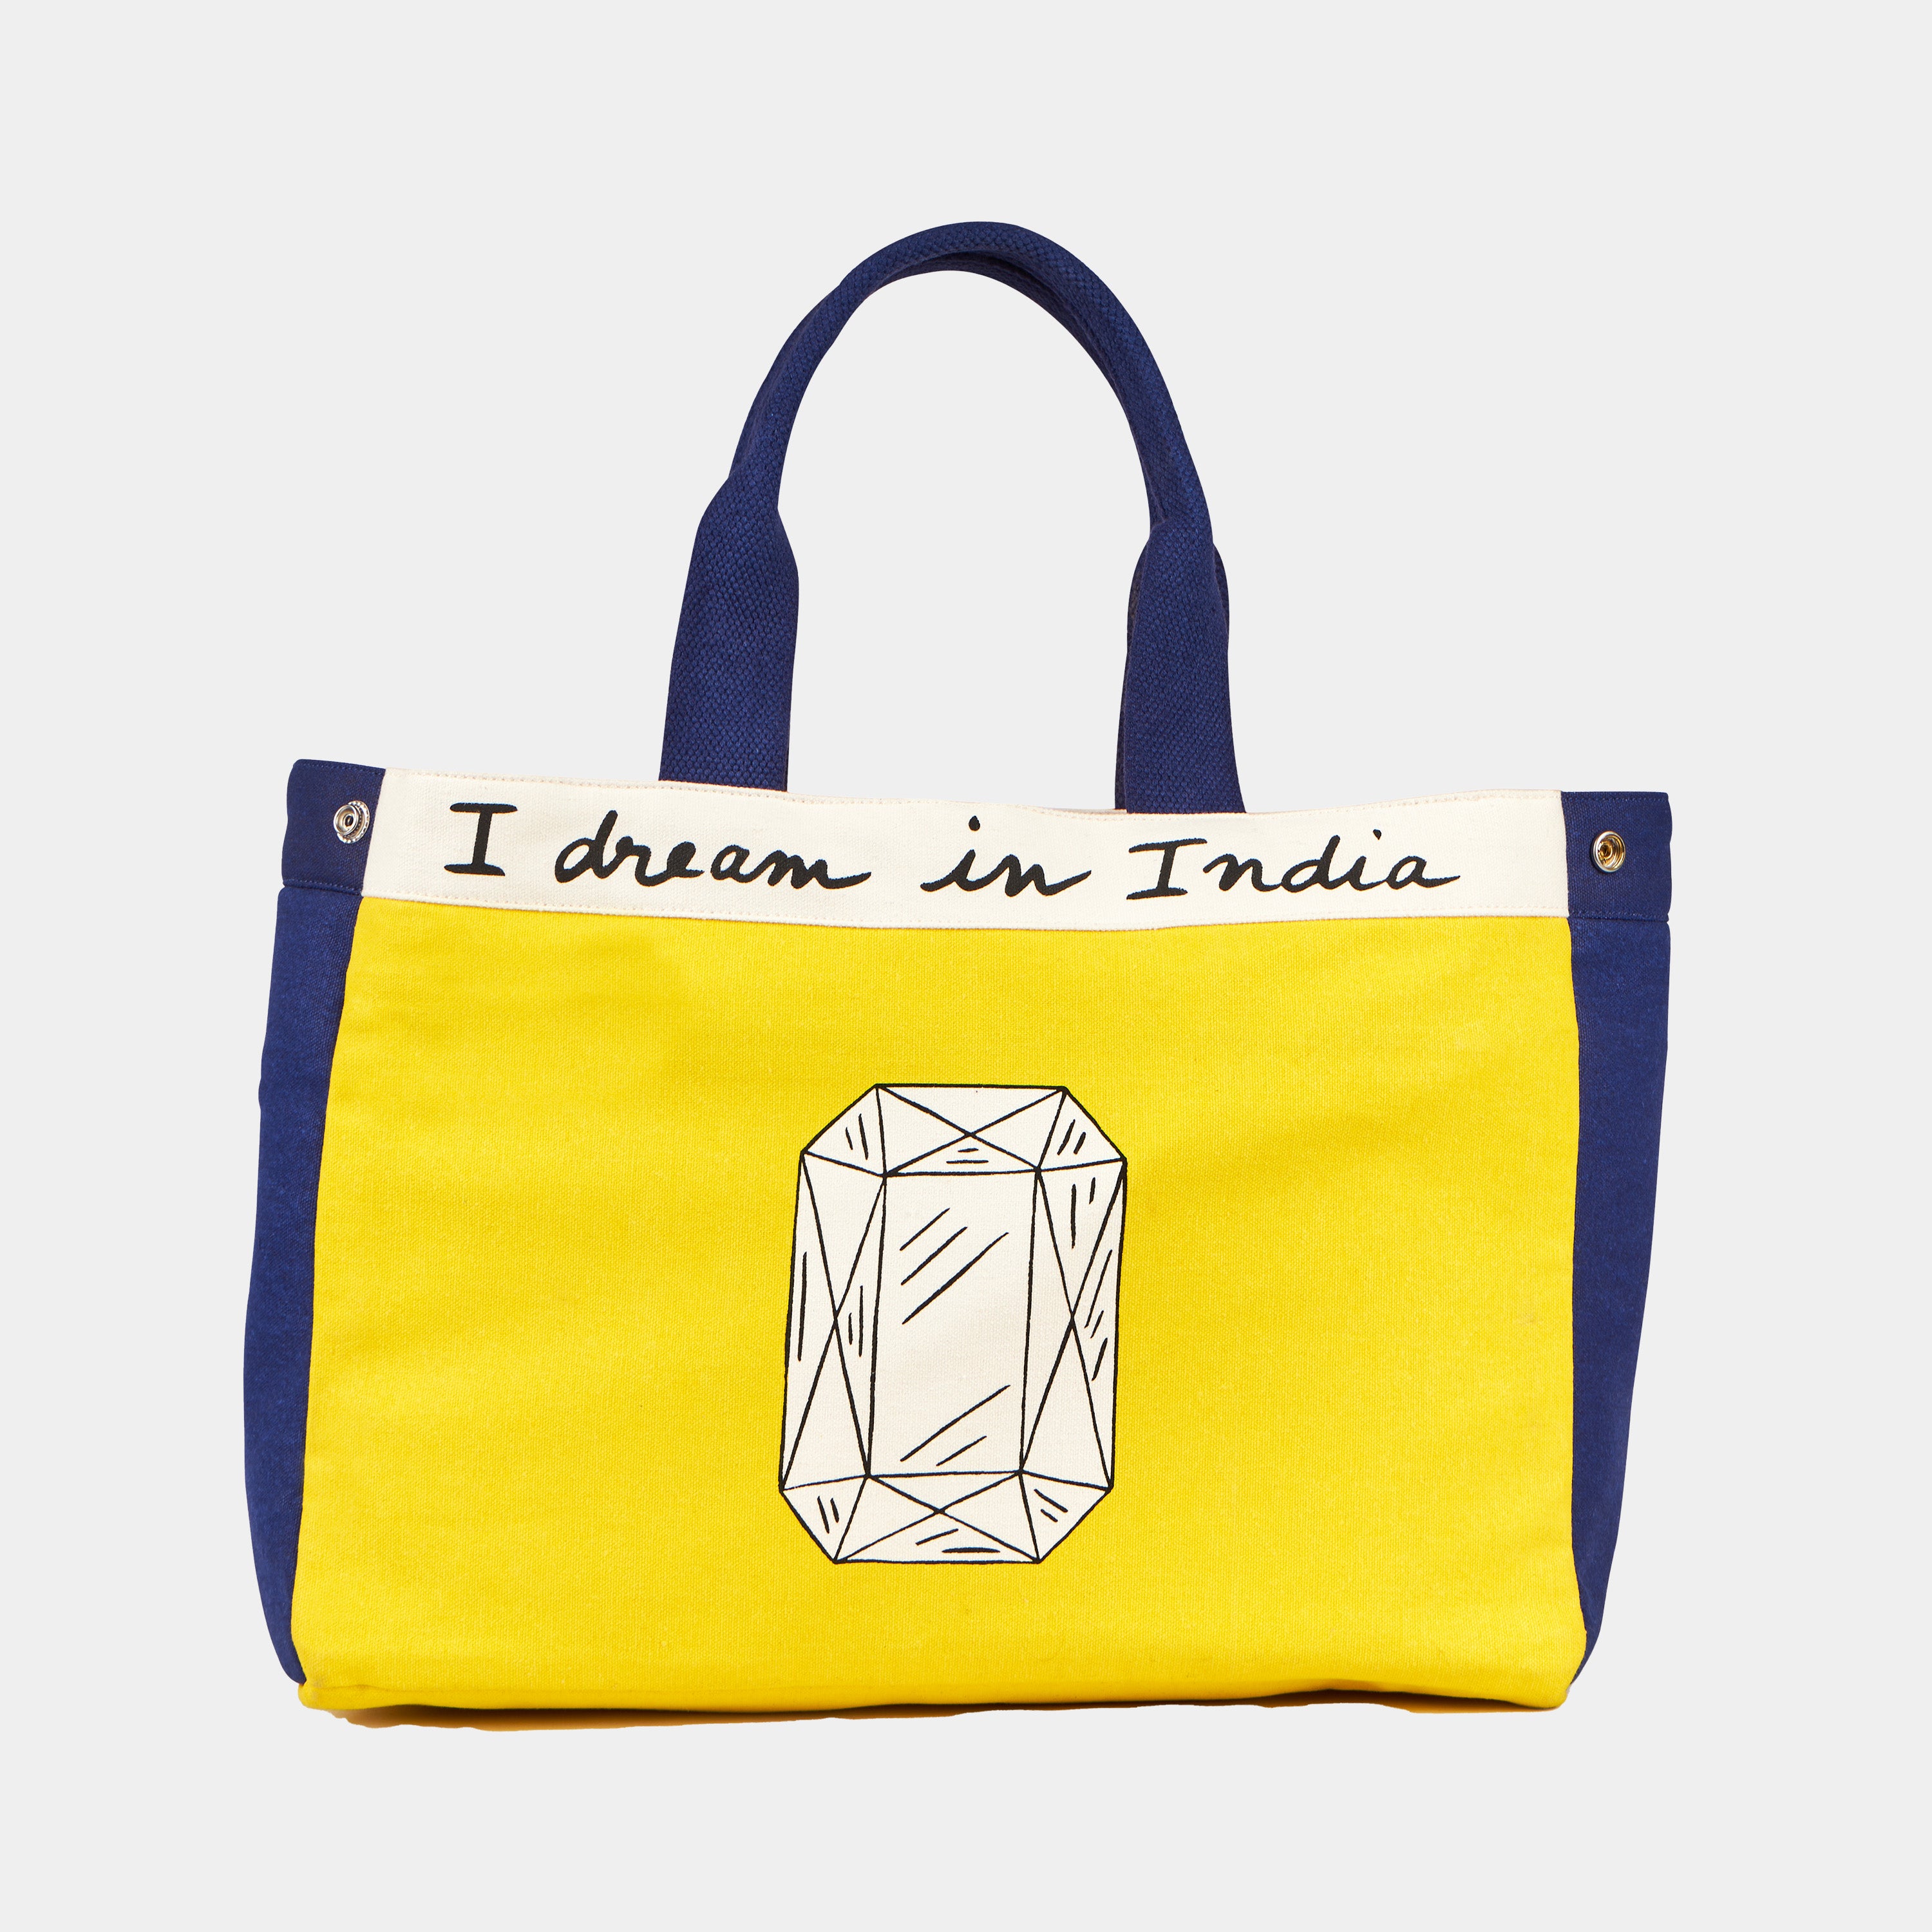 Buy Lux Bag Online In India -  India